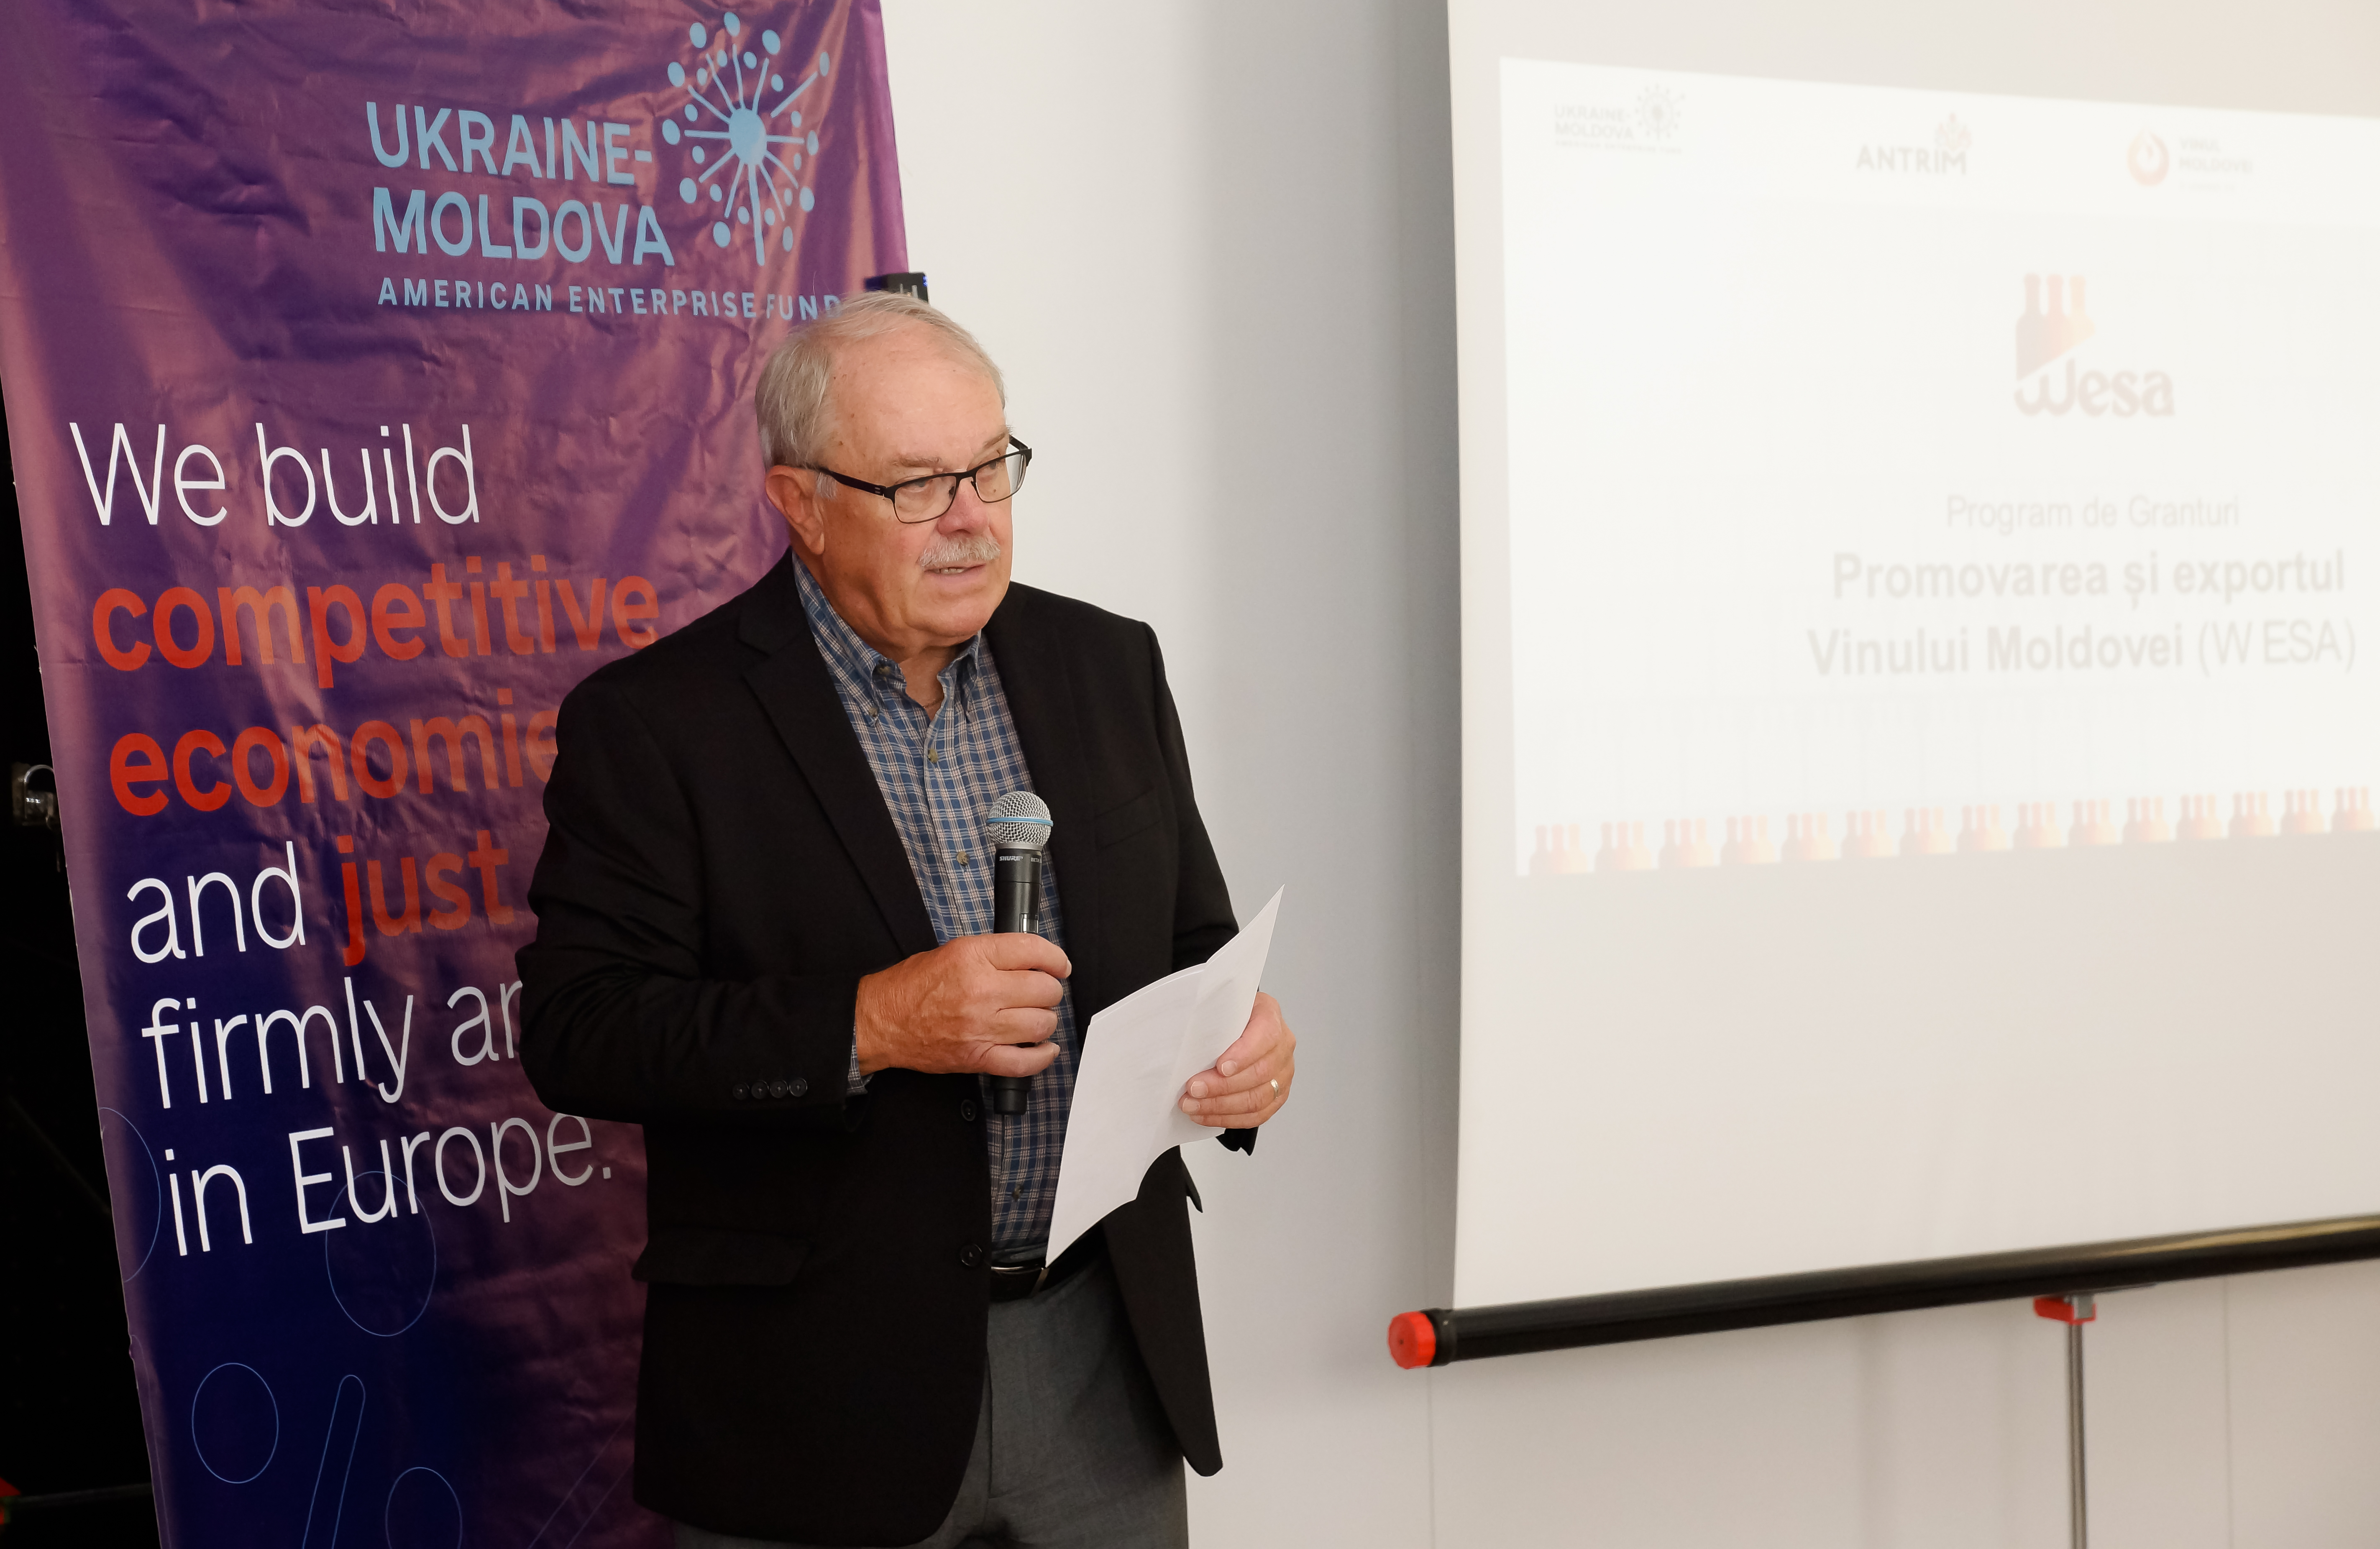 WESA grant program for Moldovan wine exporters is launched with the support of Ukraine-Moldova American Enterprise Fund